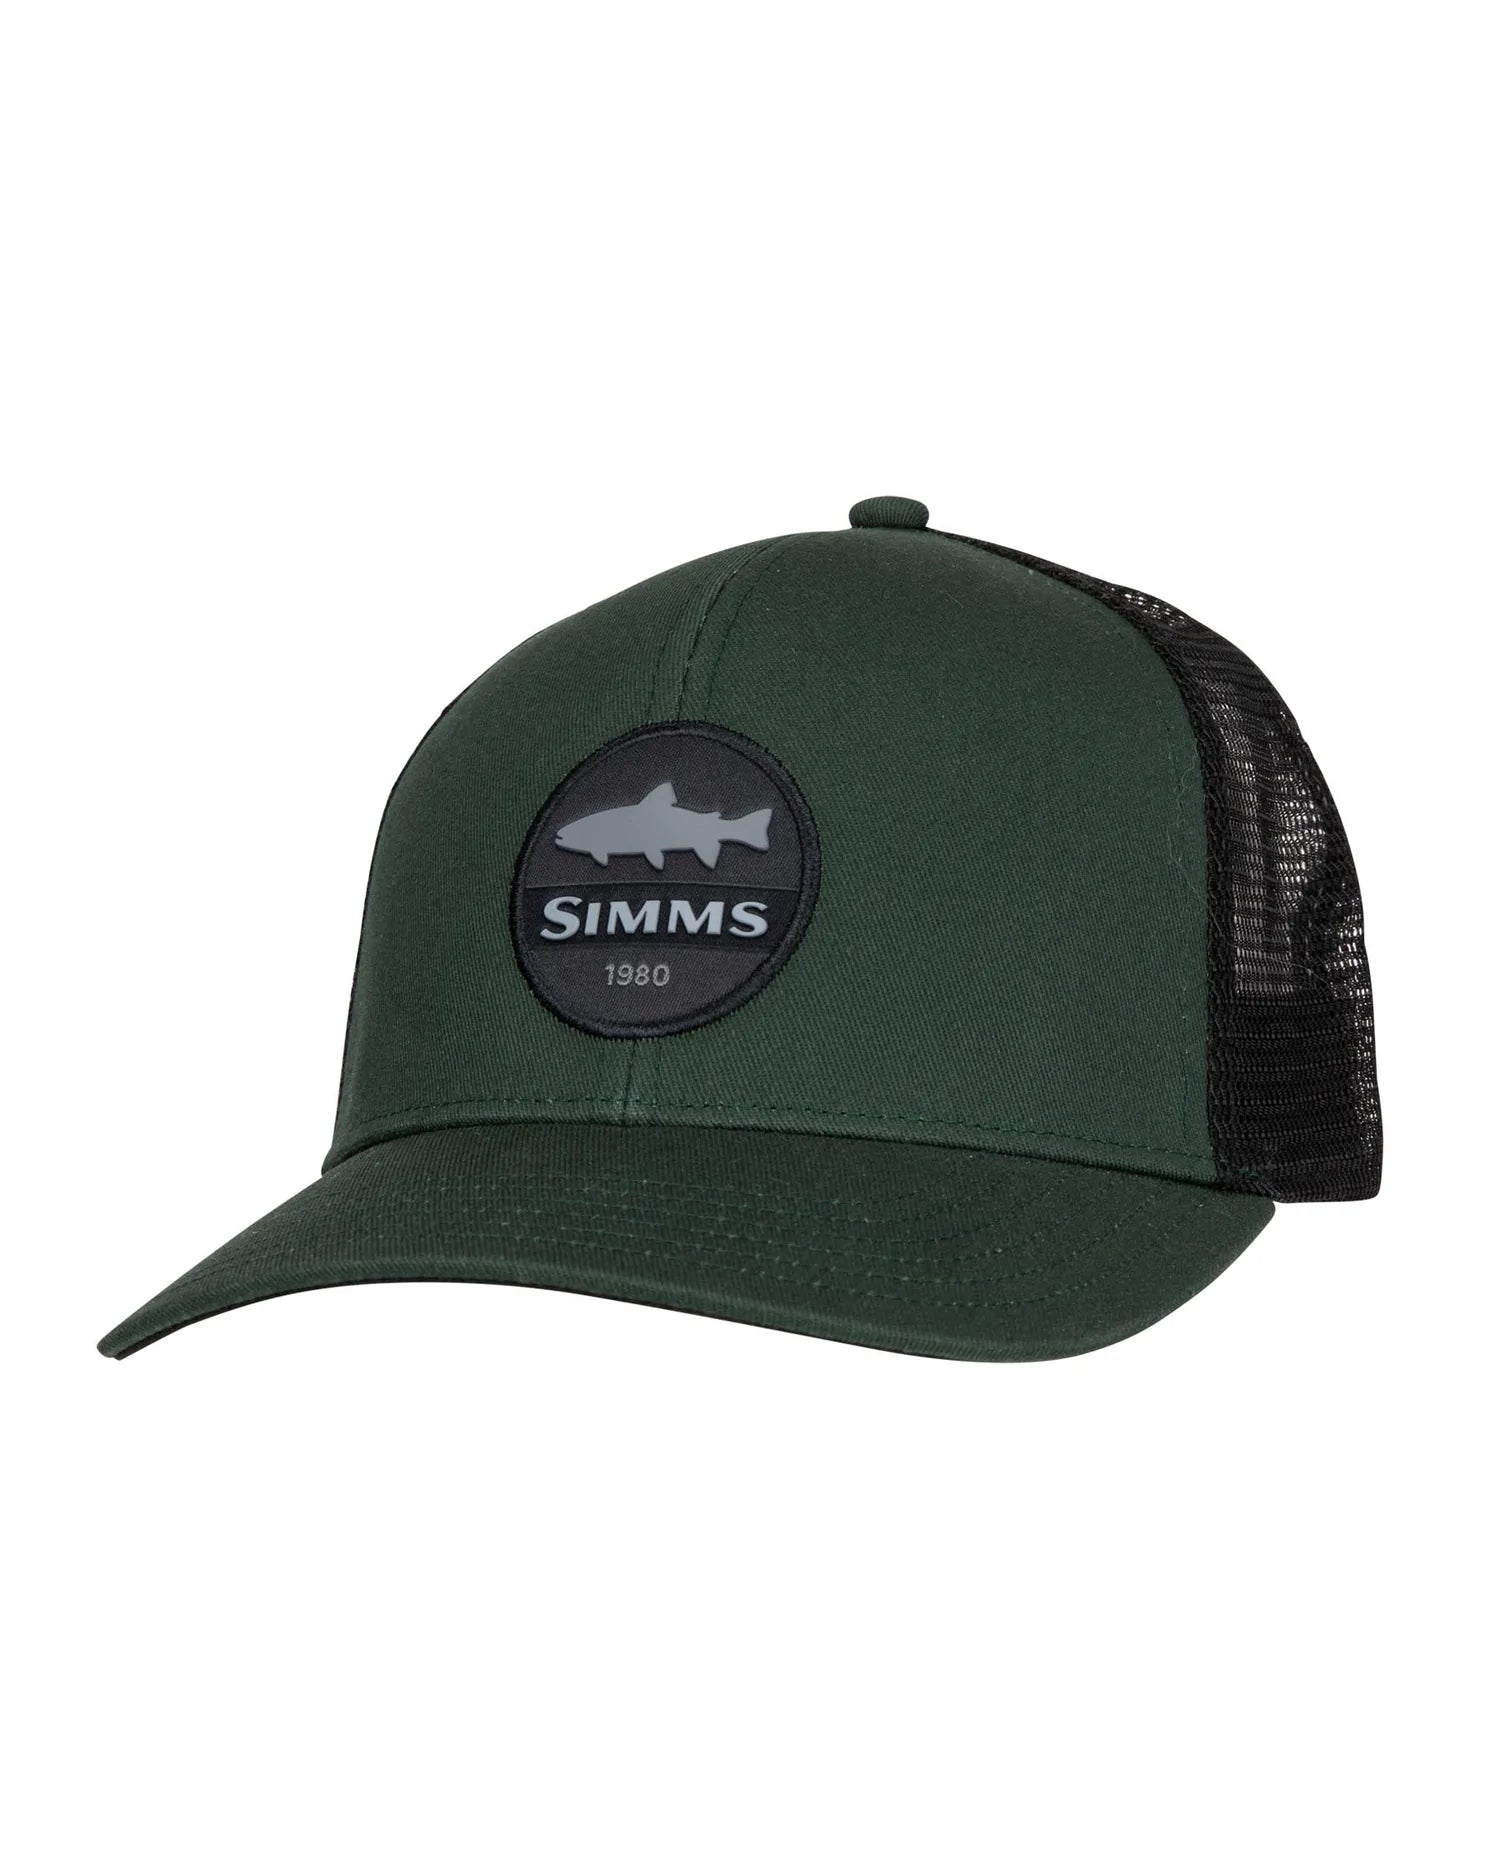 Simms Trout Patch Trucker Cap Foliage // The Flyfisher, Australia